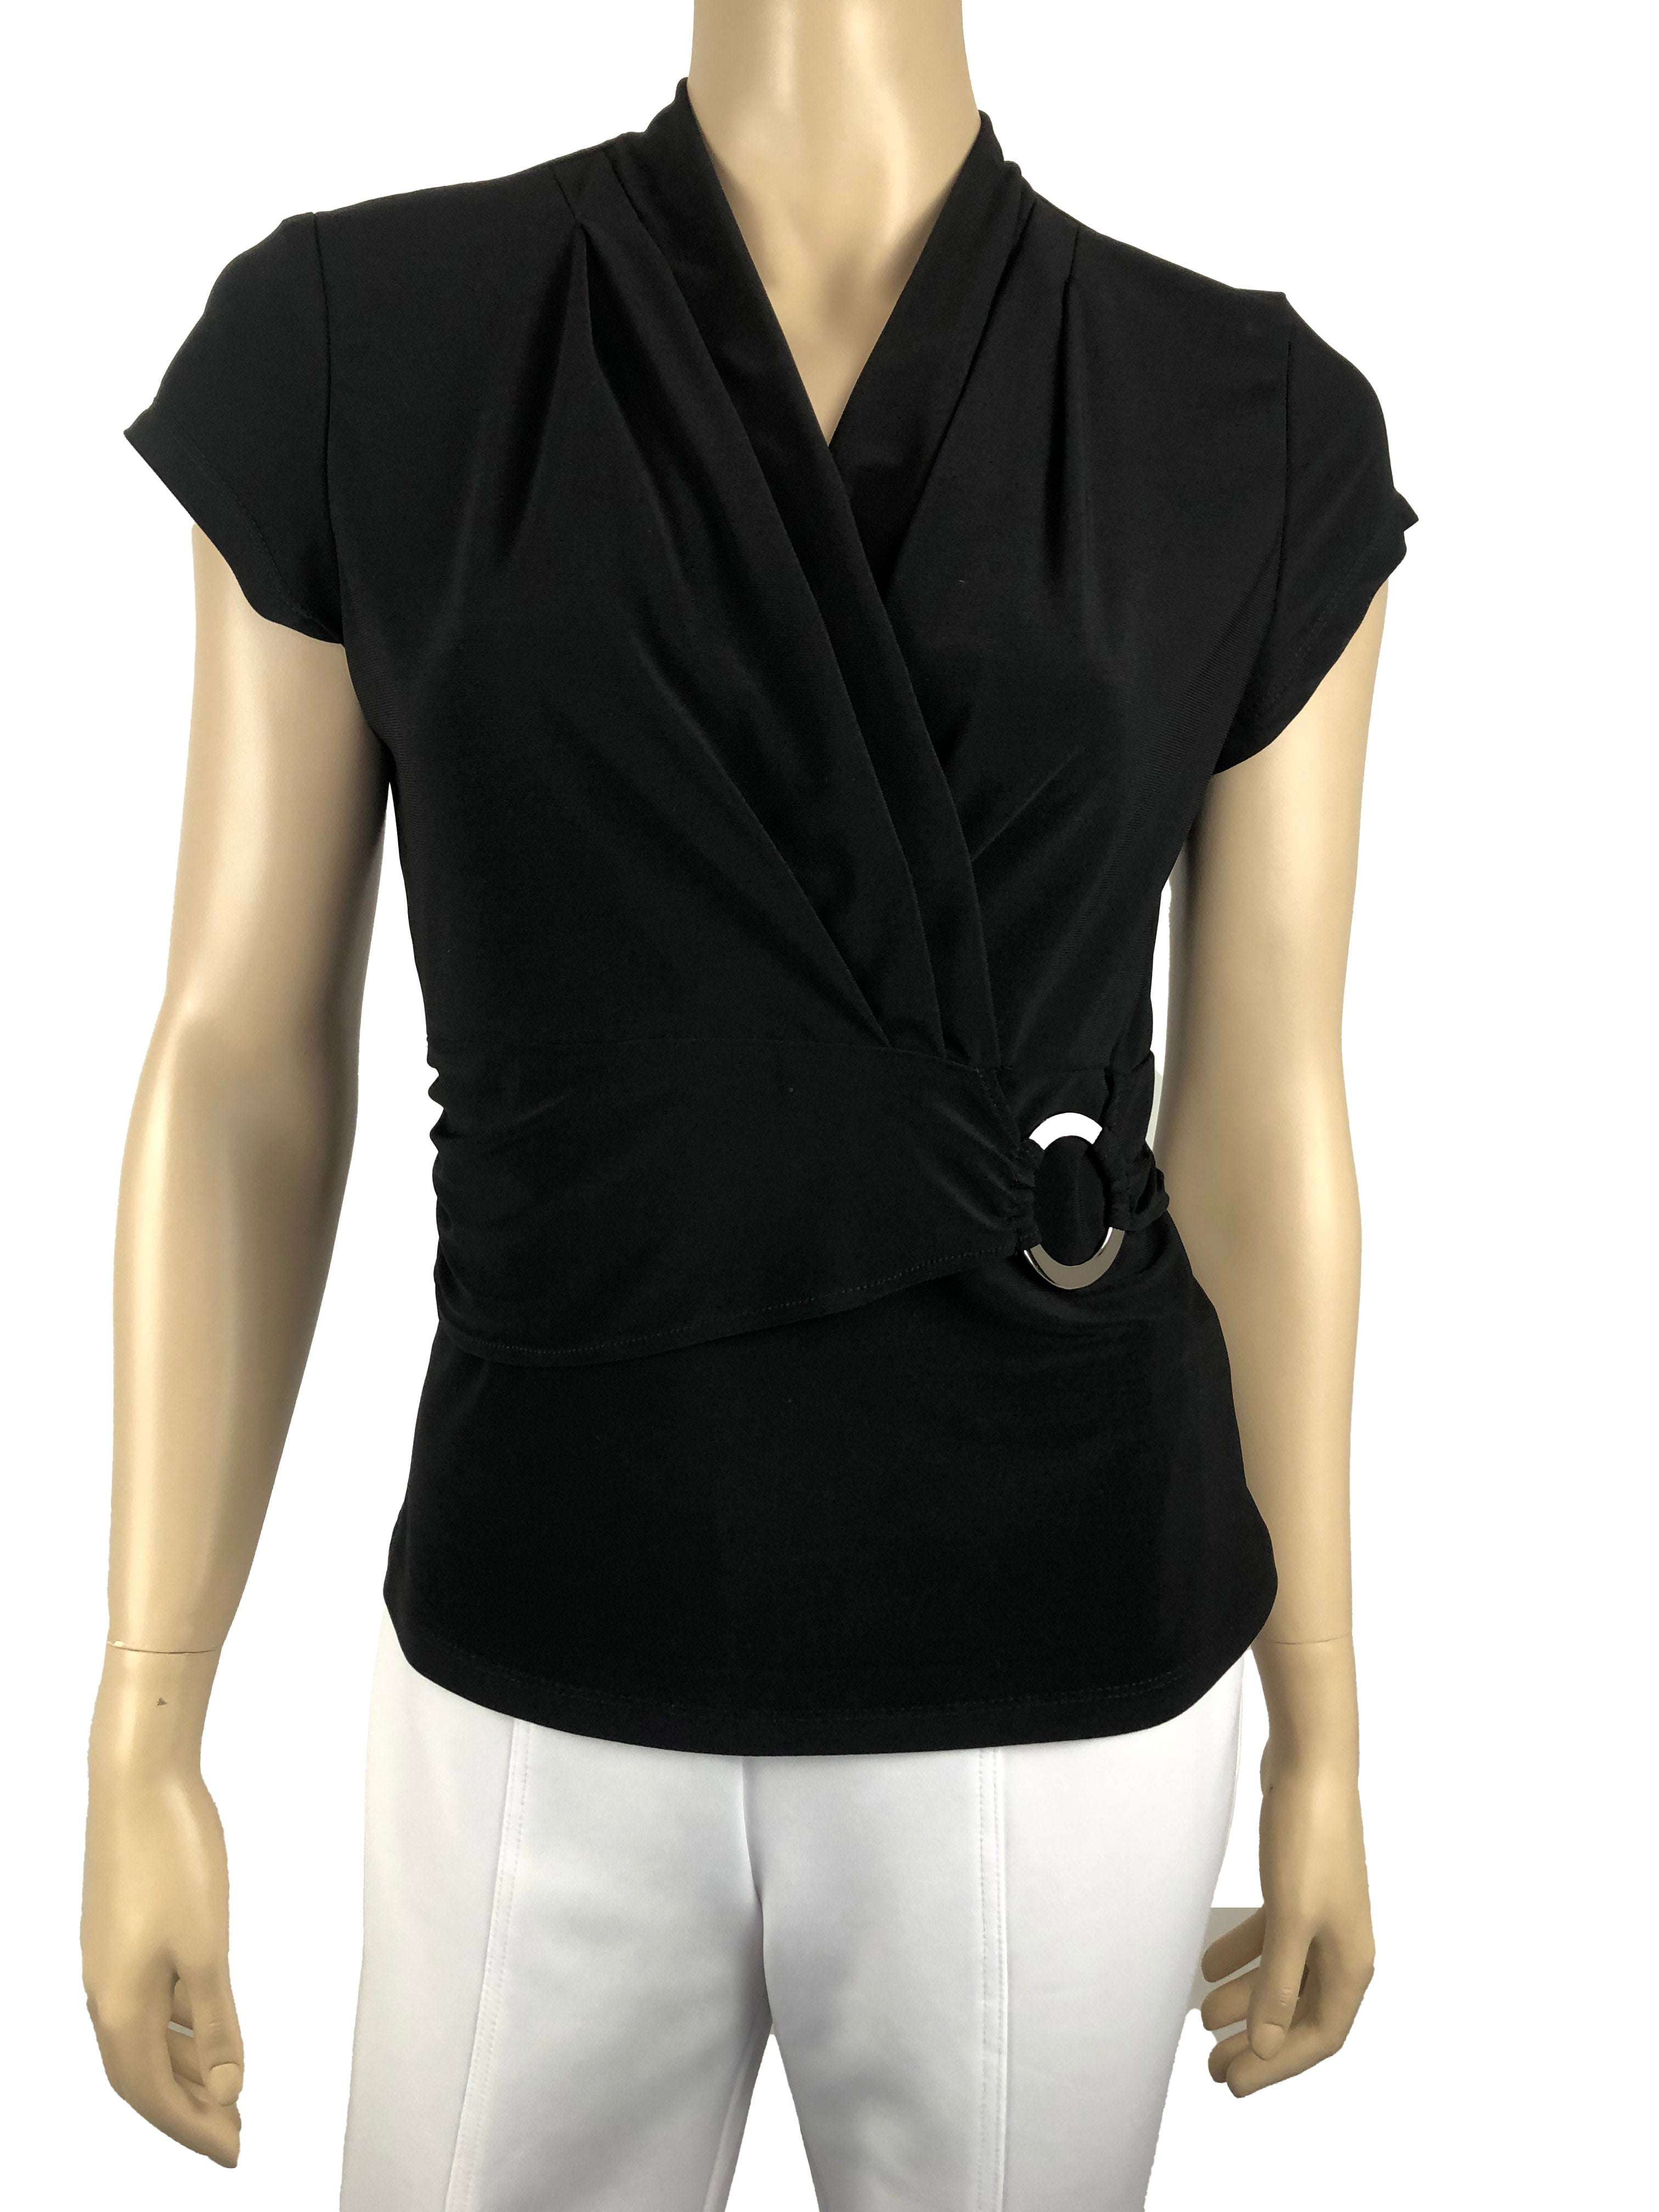 Women's Top Black Cross Over Design with Flattering Ornament Detail Made in Canada - Yvonne Marie - Yvonne Marie